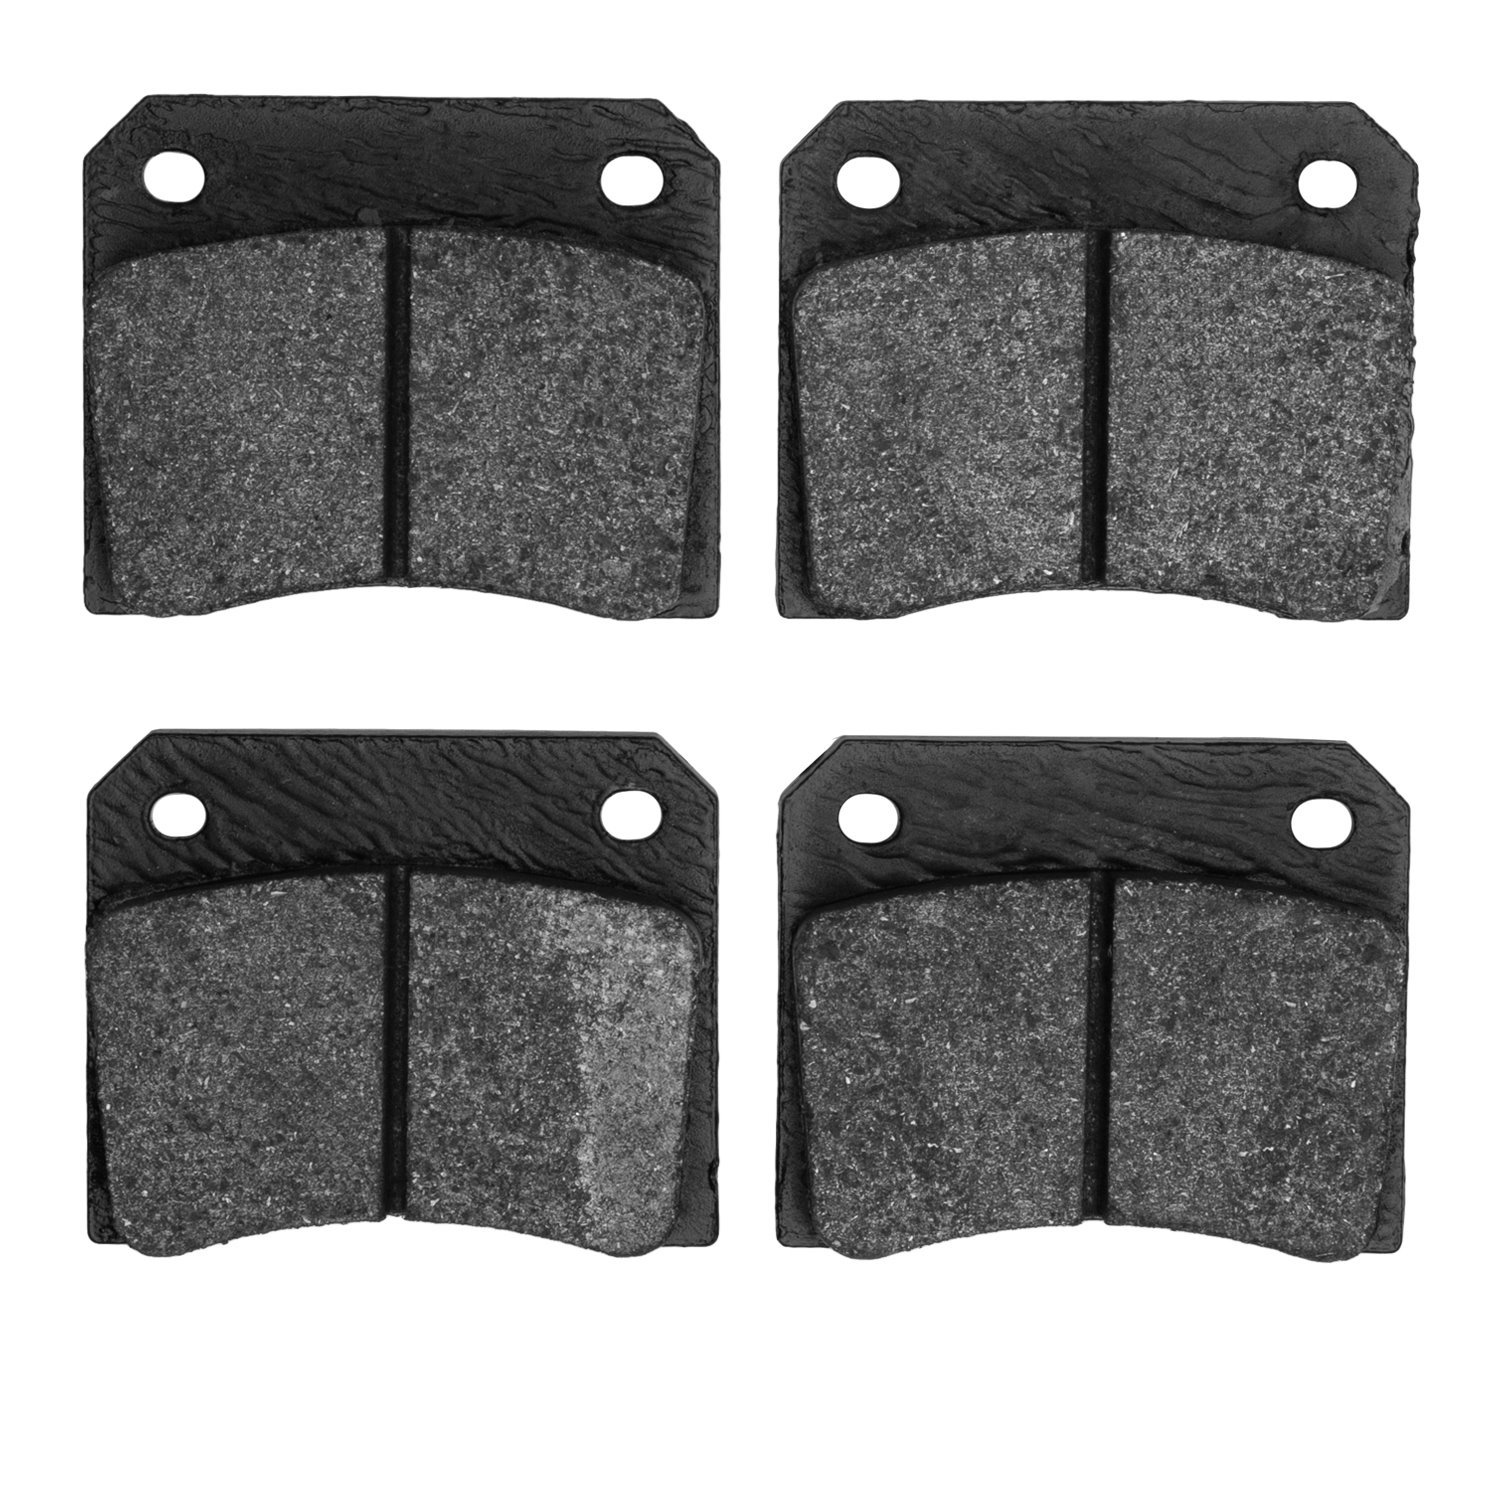 1551-0009-00 5000 Advanced Low-Metallic Brake Pads, 1958-1993 Multiple Makes/Models, Position: Front,Rear